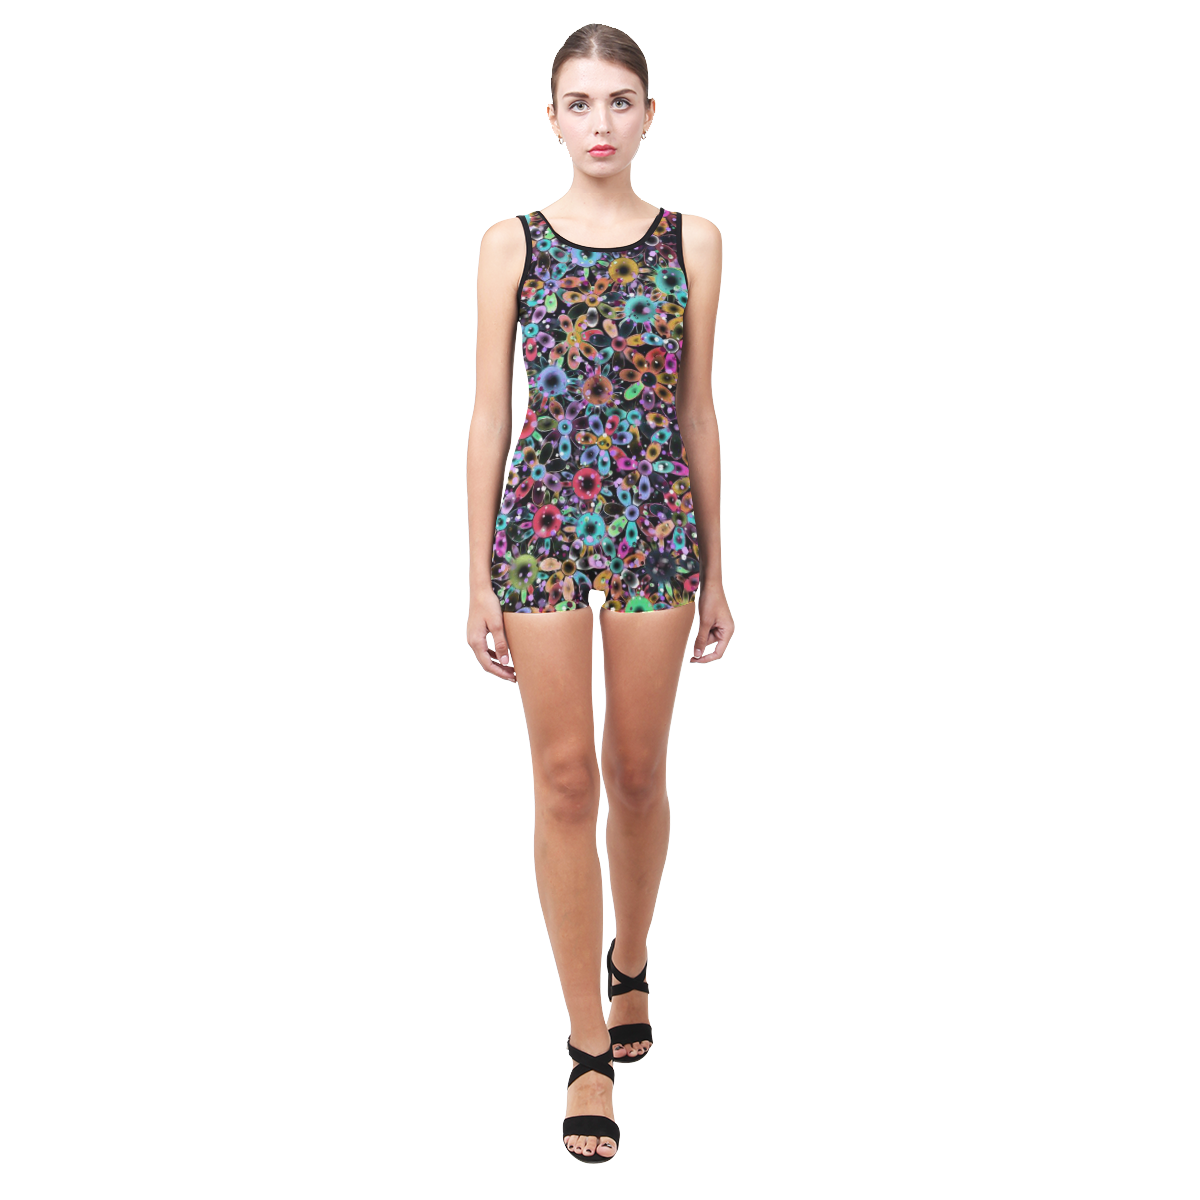 Vivid floral pattern 4181C by FeelGood Classic One Piece Swimwear (Model S03)